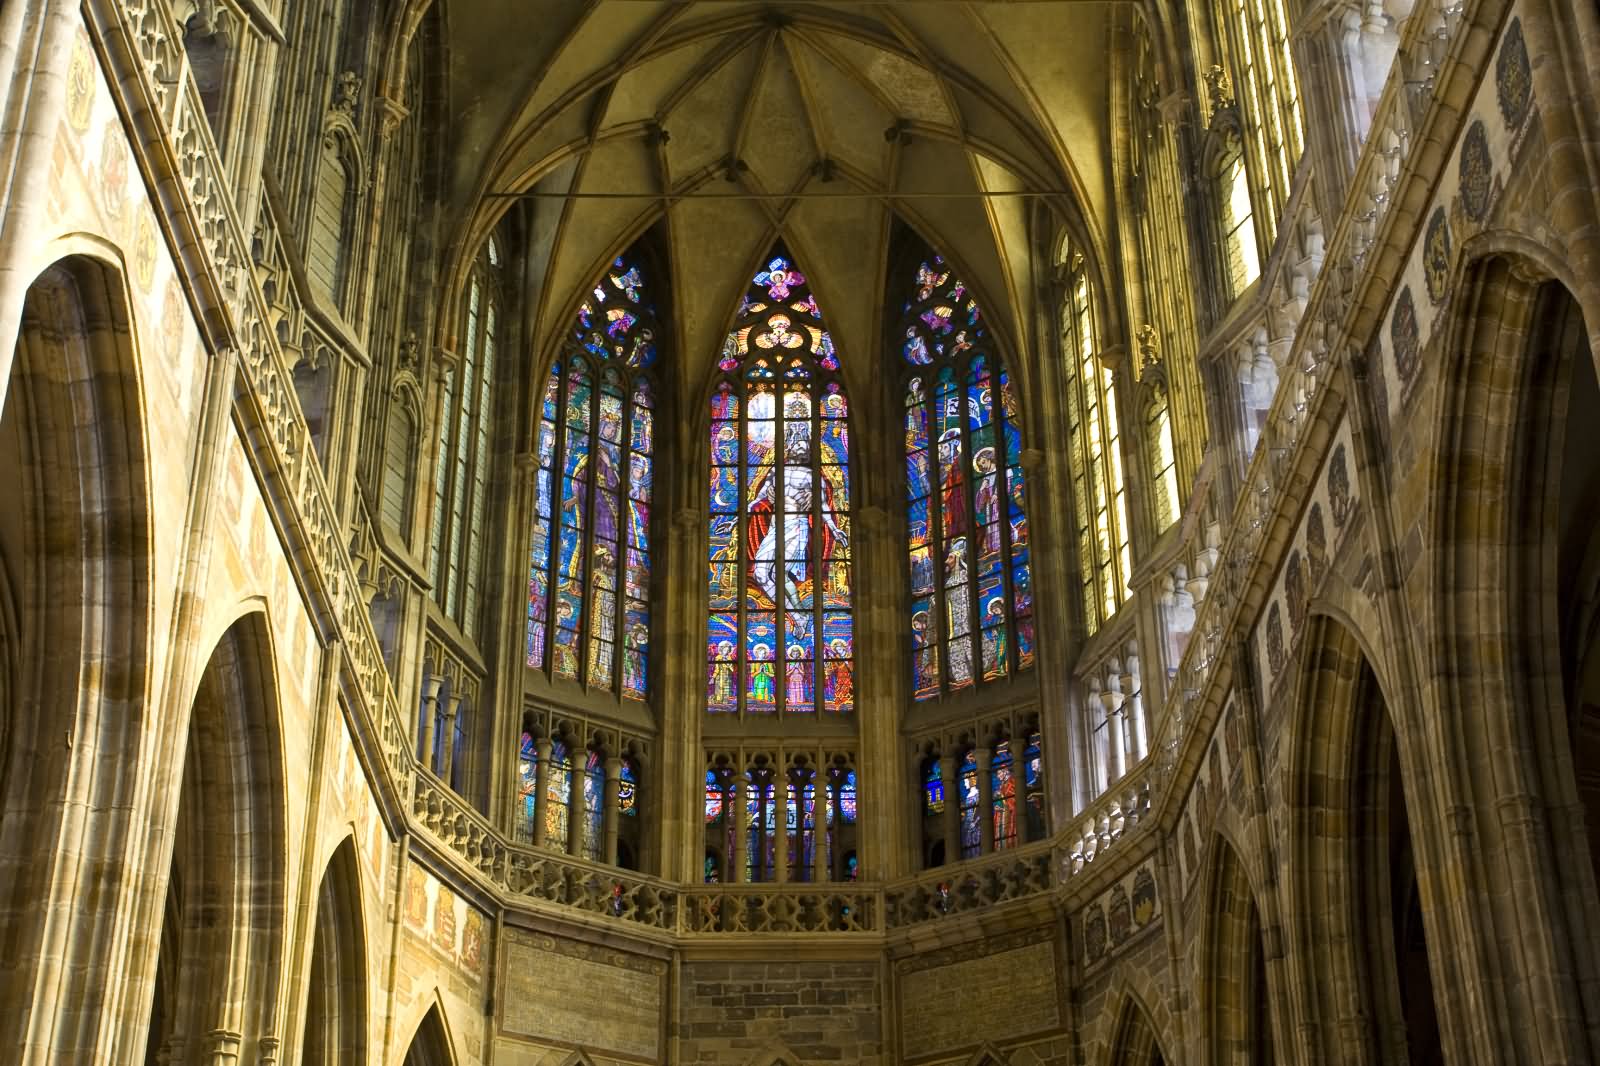 Stained Glass Window Inside The St. Vitus Cathedral, Prague